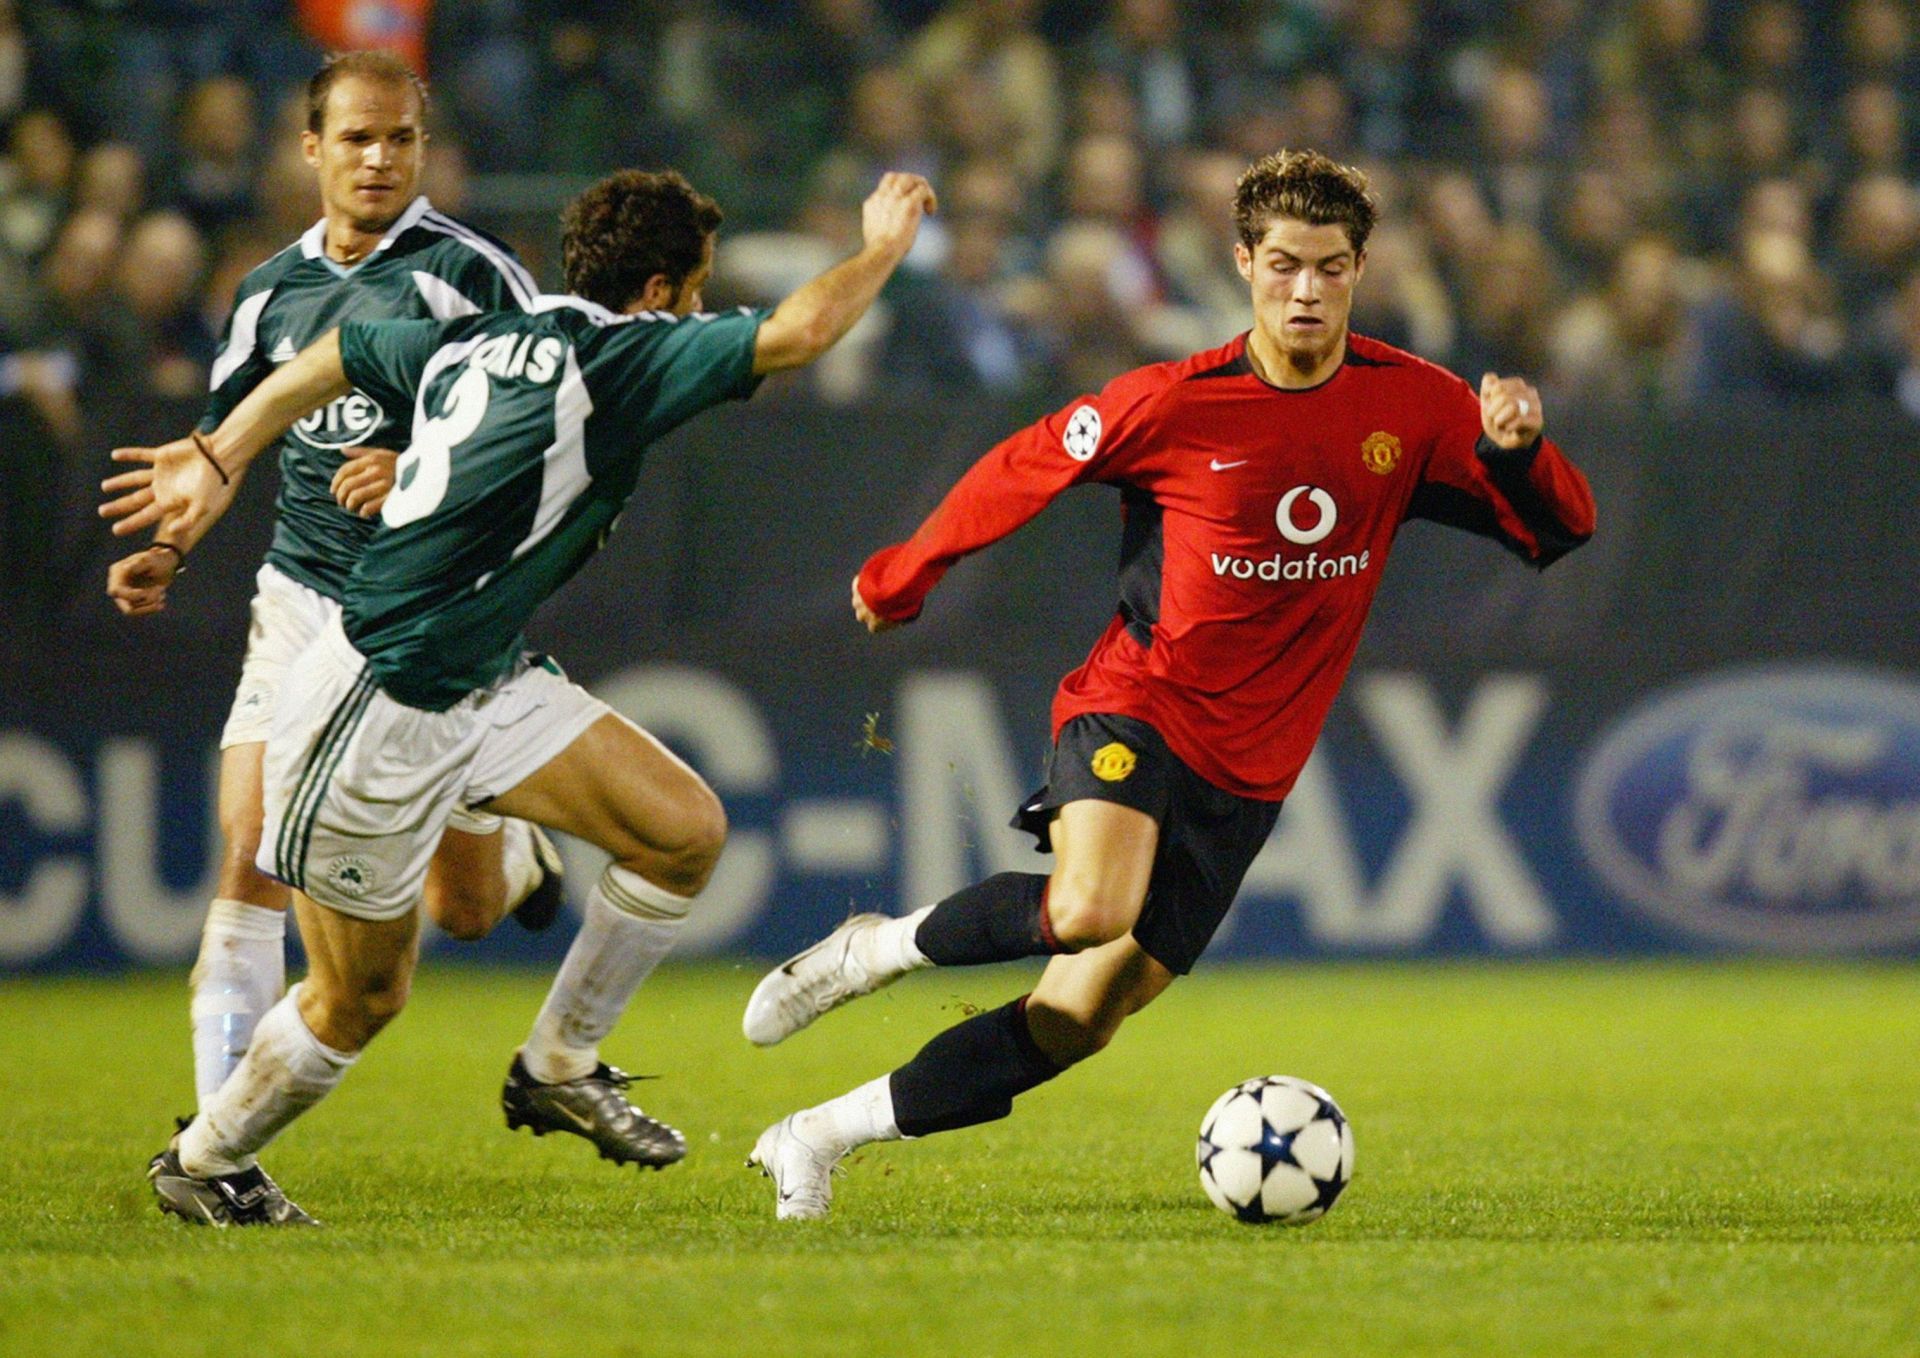 Cristiano Ronaldo was promoted to the senior side in 2003 at the age of 18